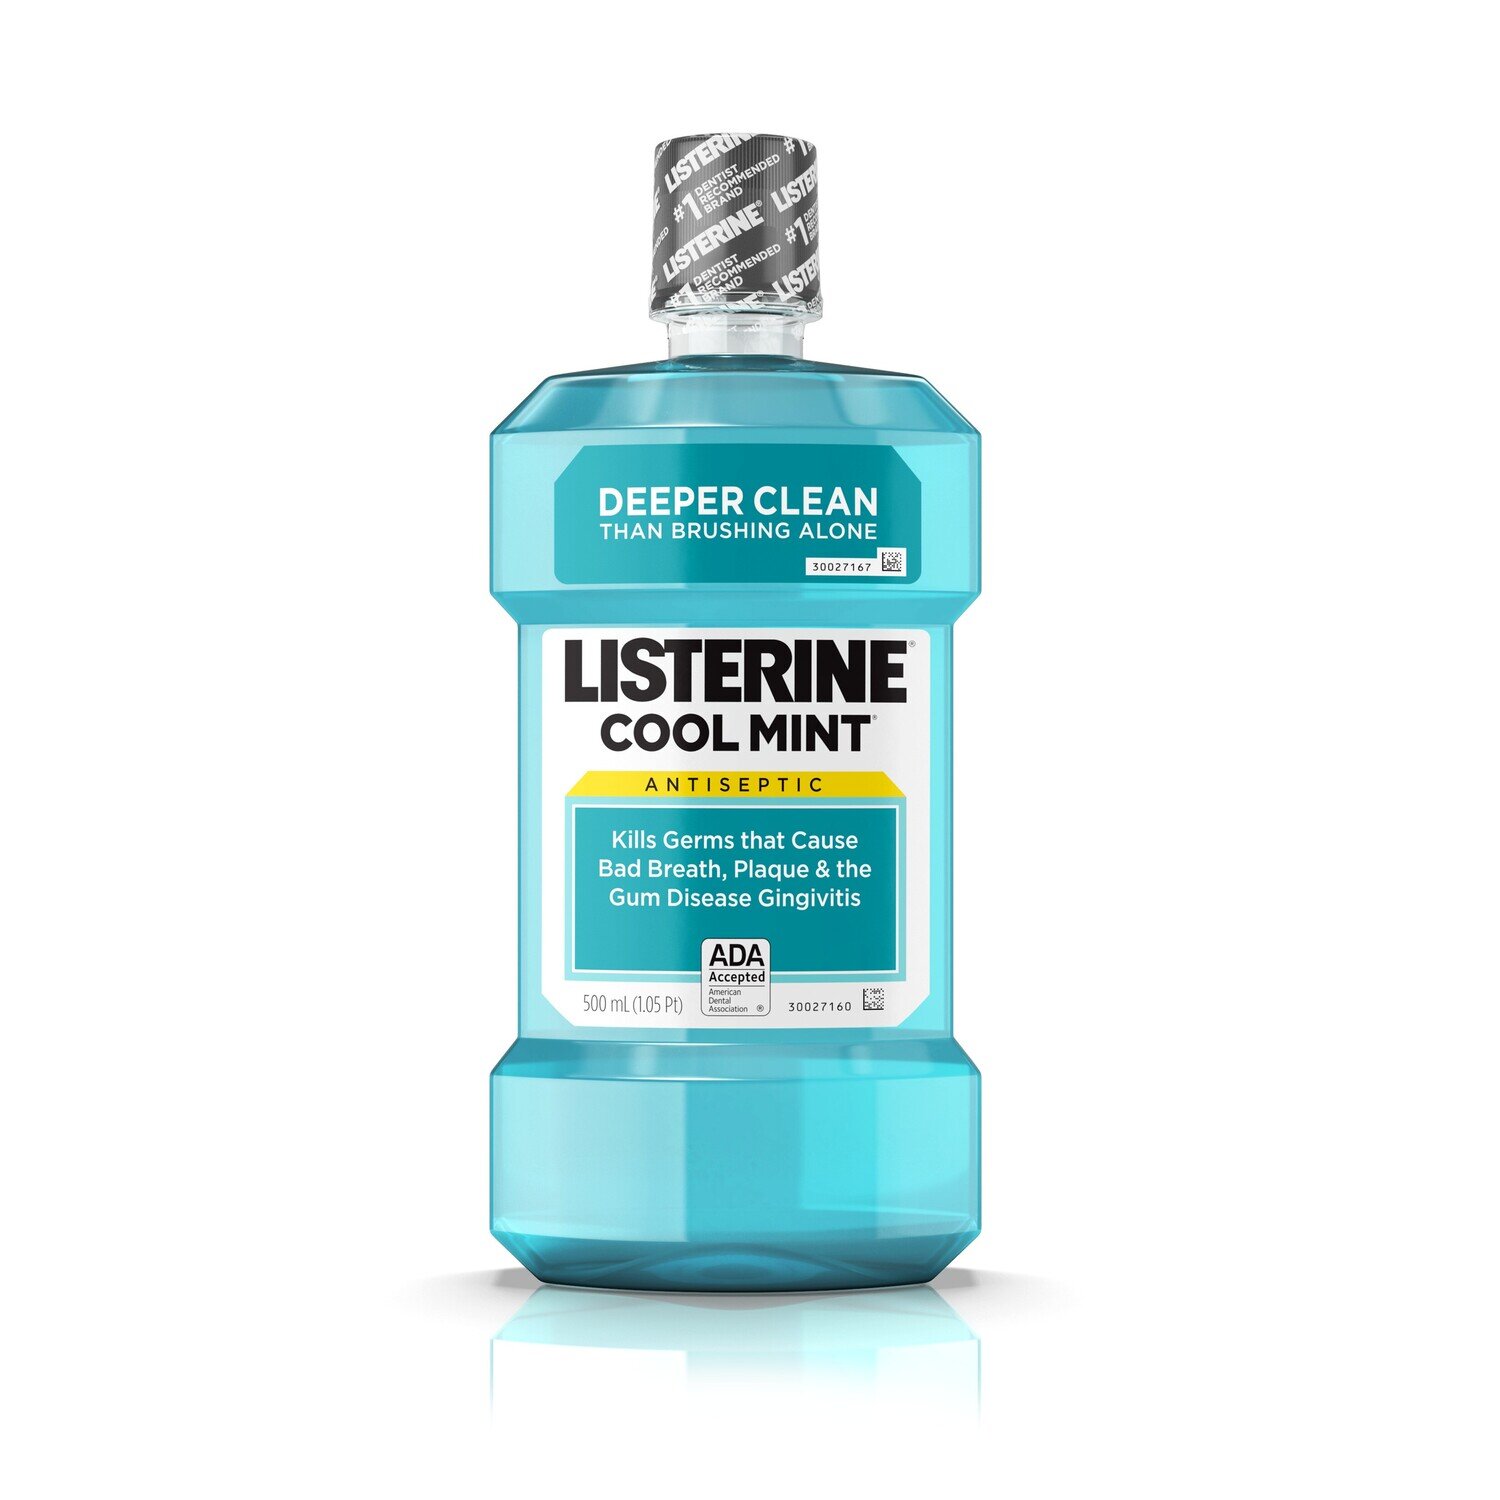  Listerine Cool Mint Antiseptic Oral Care Mouthwash to